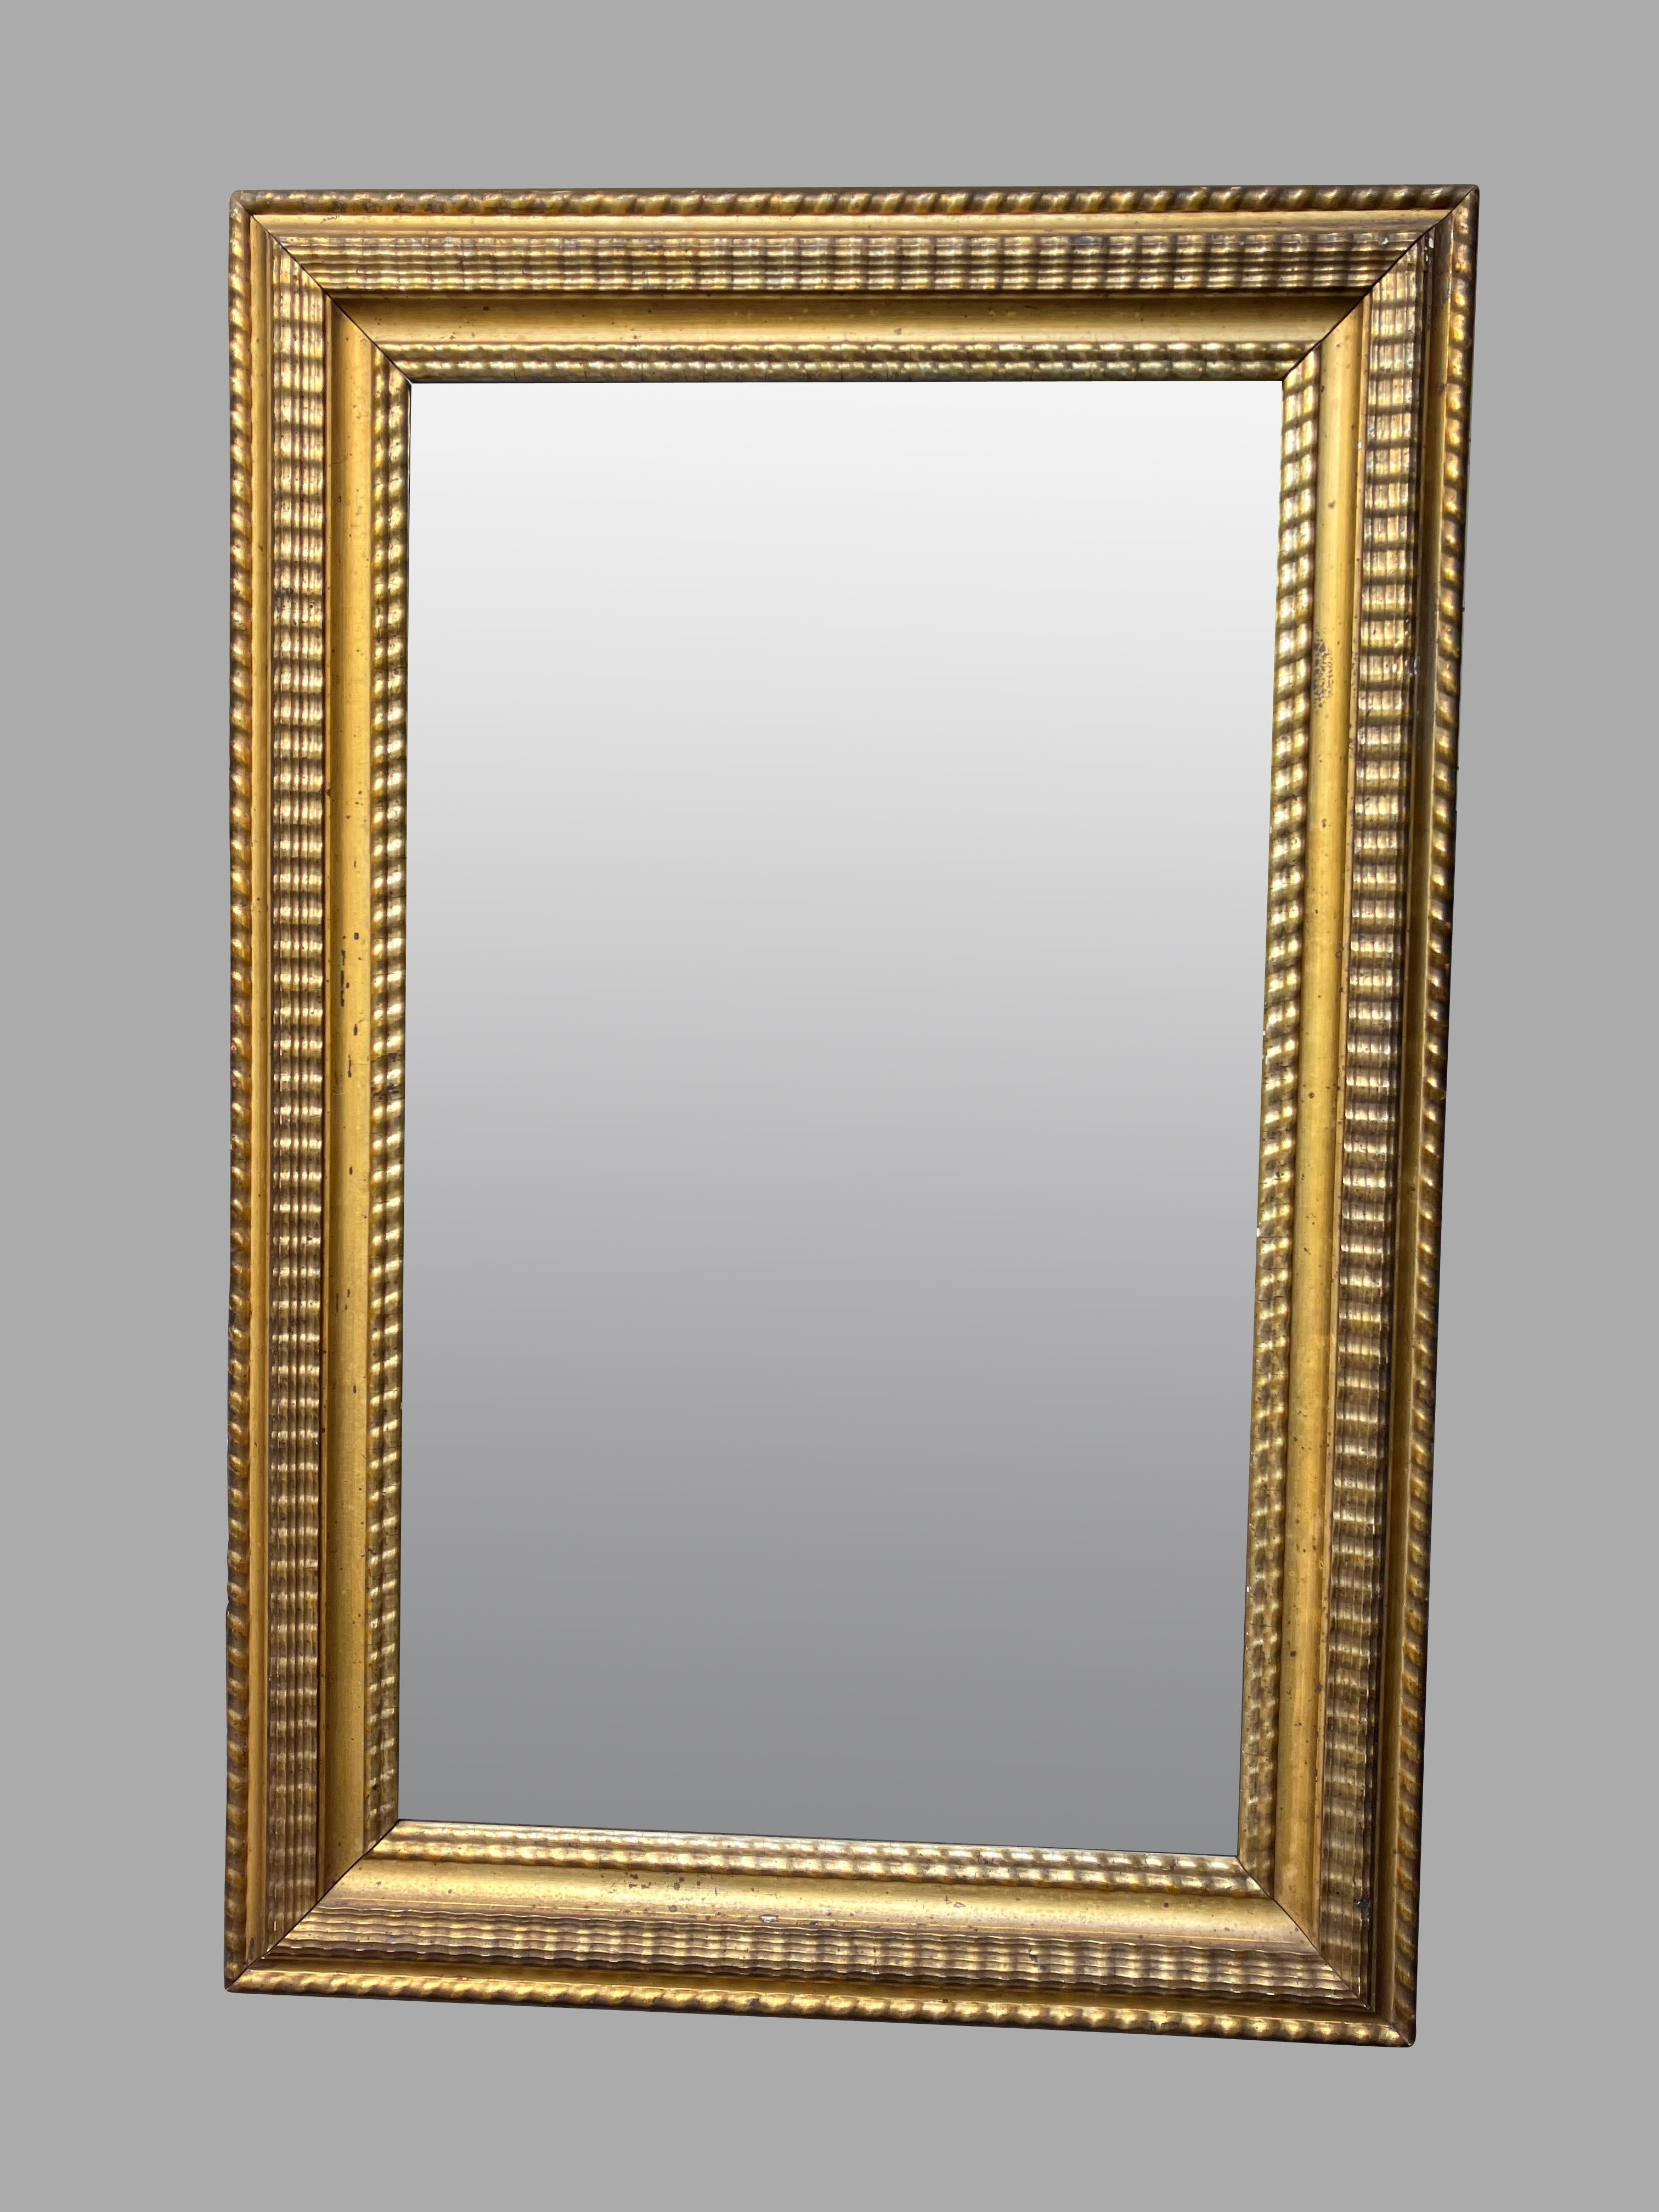 American Nineteenth Century Giltwood Mirror Retaining Its Original Glass Plate For Sale 1